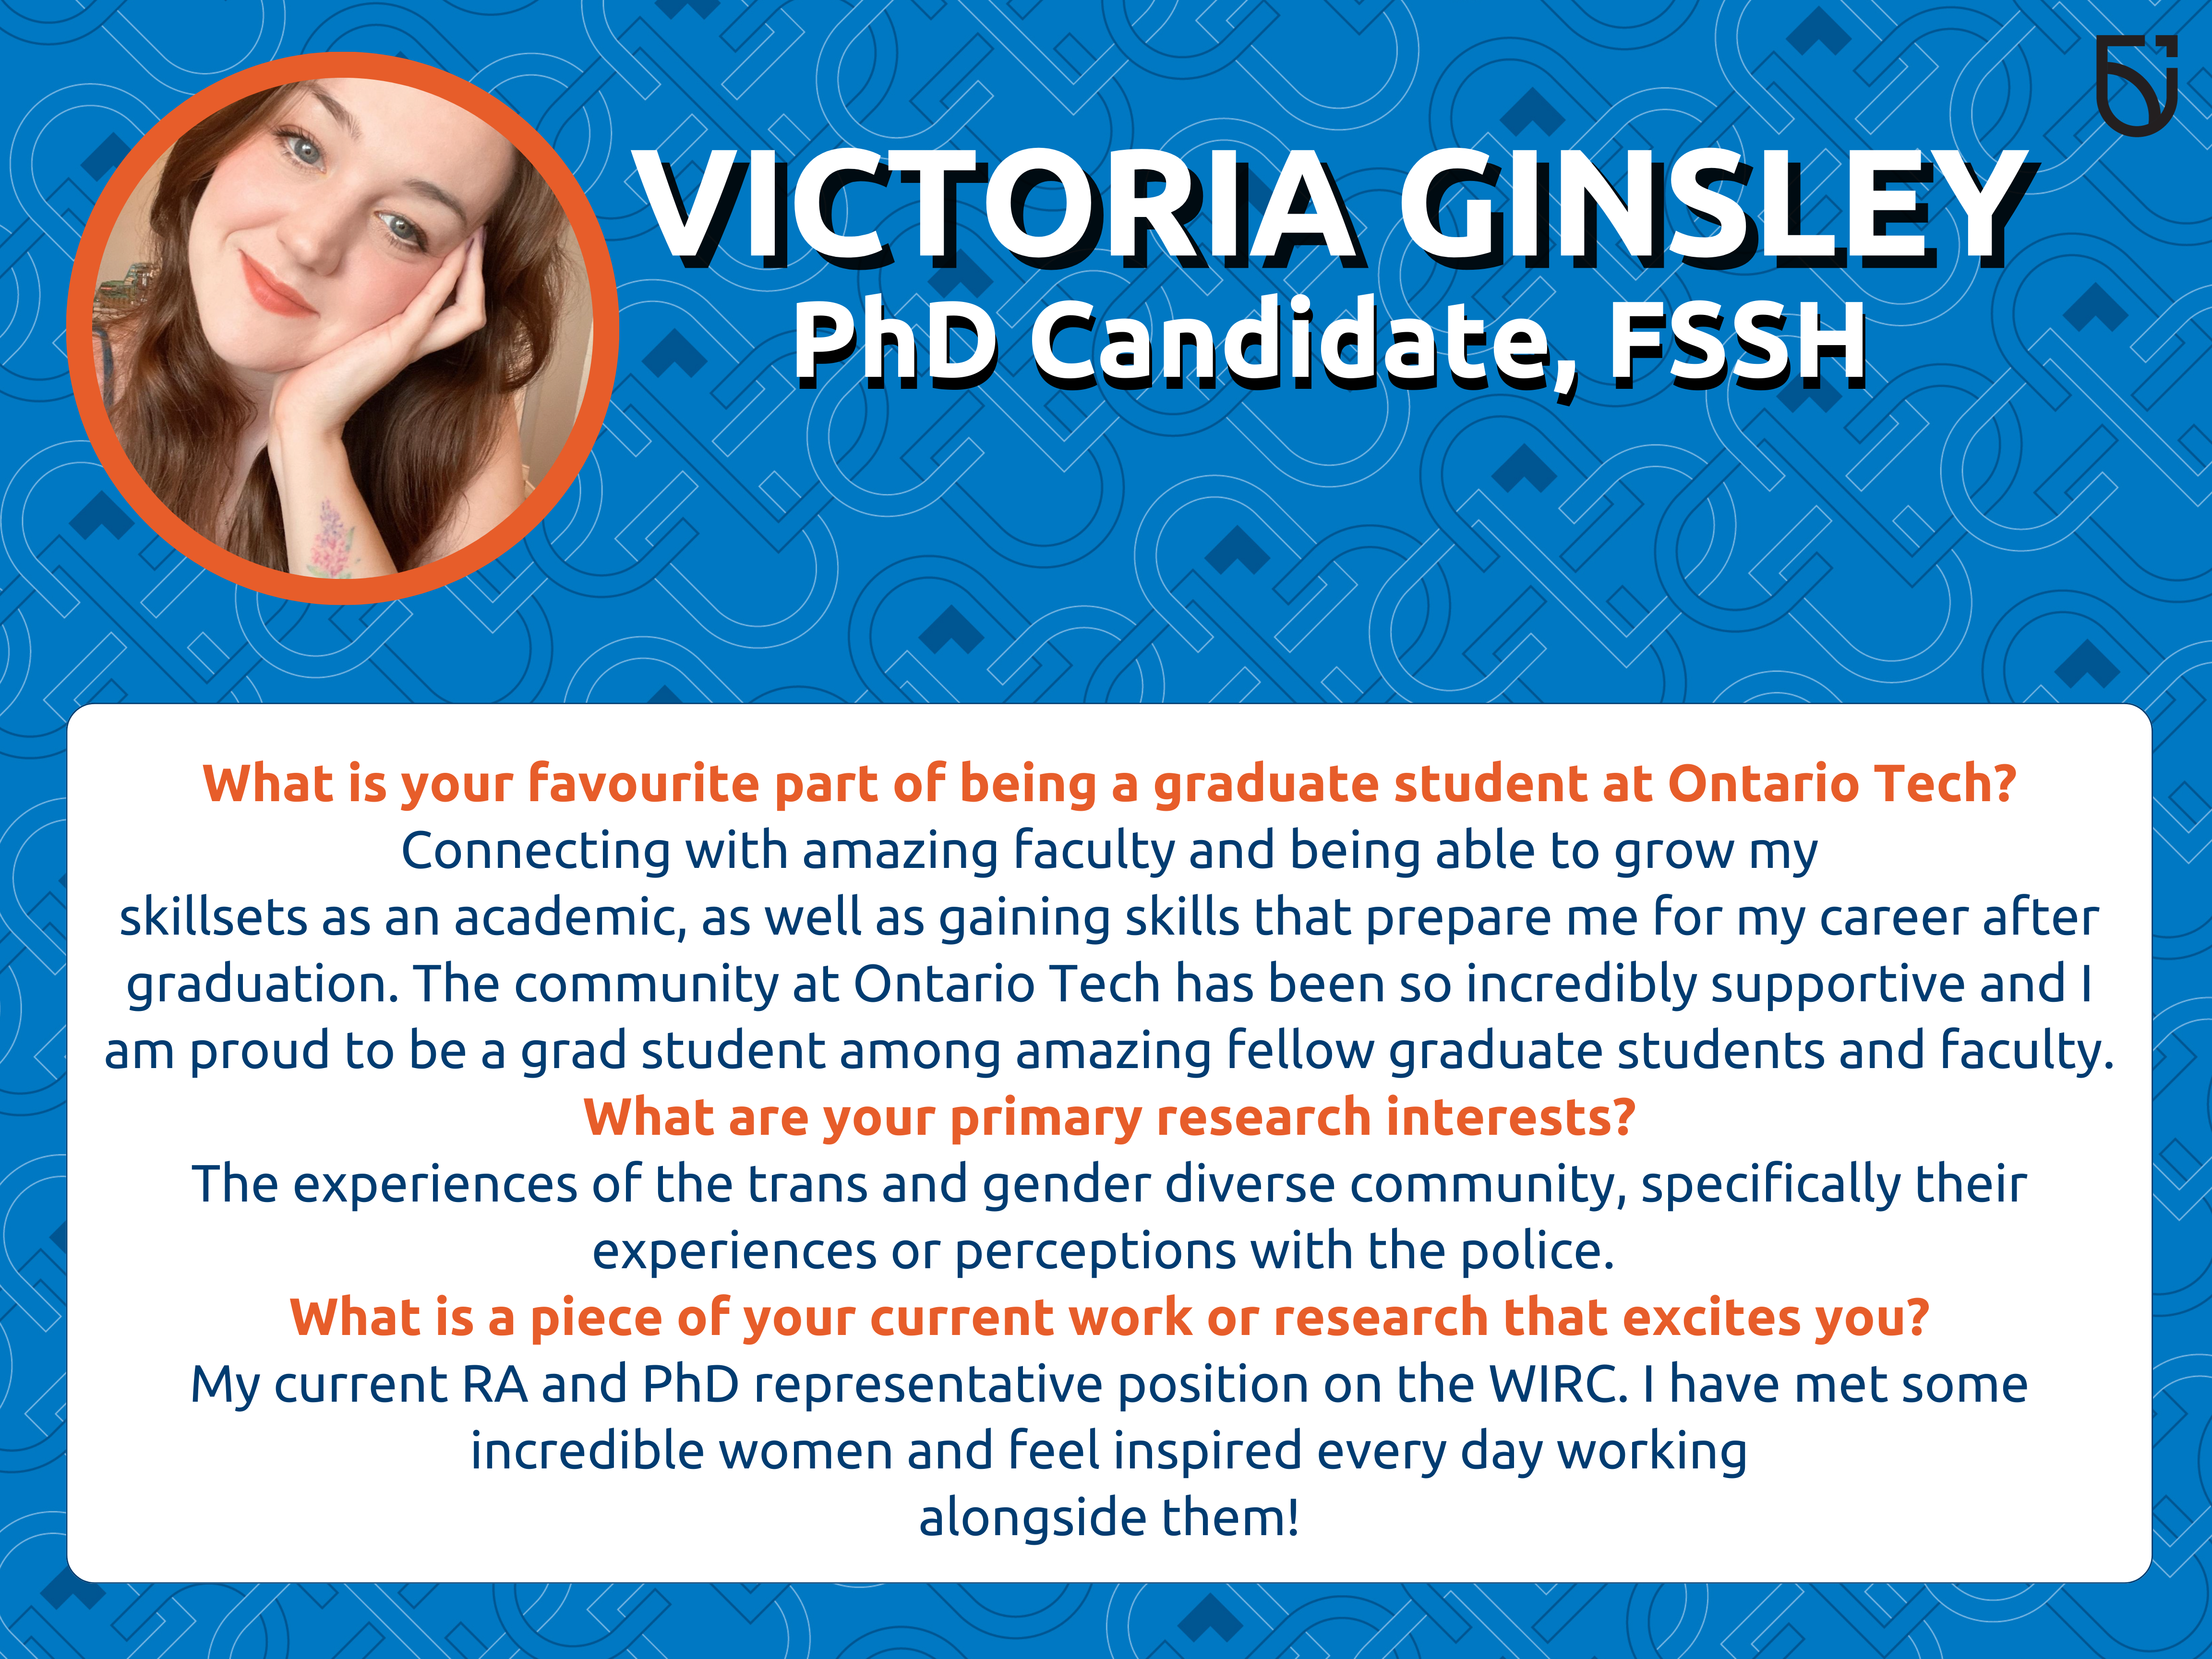 This photo is a Women’s Wednesday feature of Vikki Ginsley, a PhD Candidate in the Faculty of Social Science and Humanities